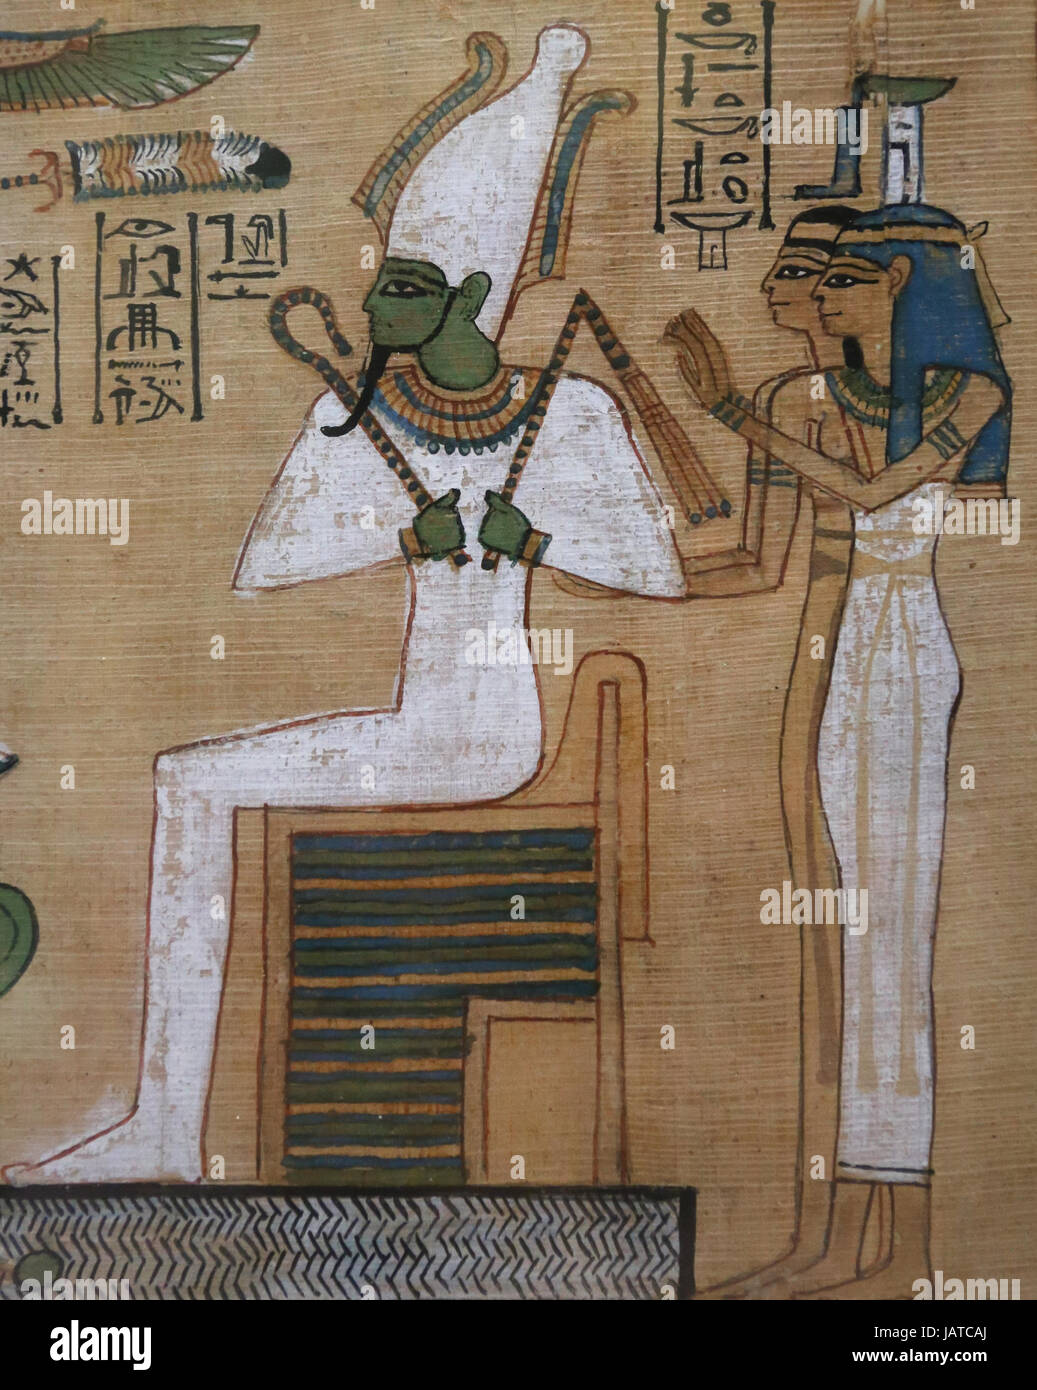 Book of the Dead. Judgement from scribe Hunefer. 19th dynasty. 1300 BCE.  Osiris, seated with Isis and Nephthys. British Museum. London. Stock Photo